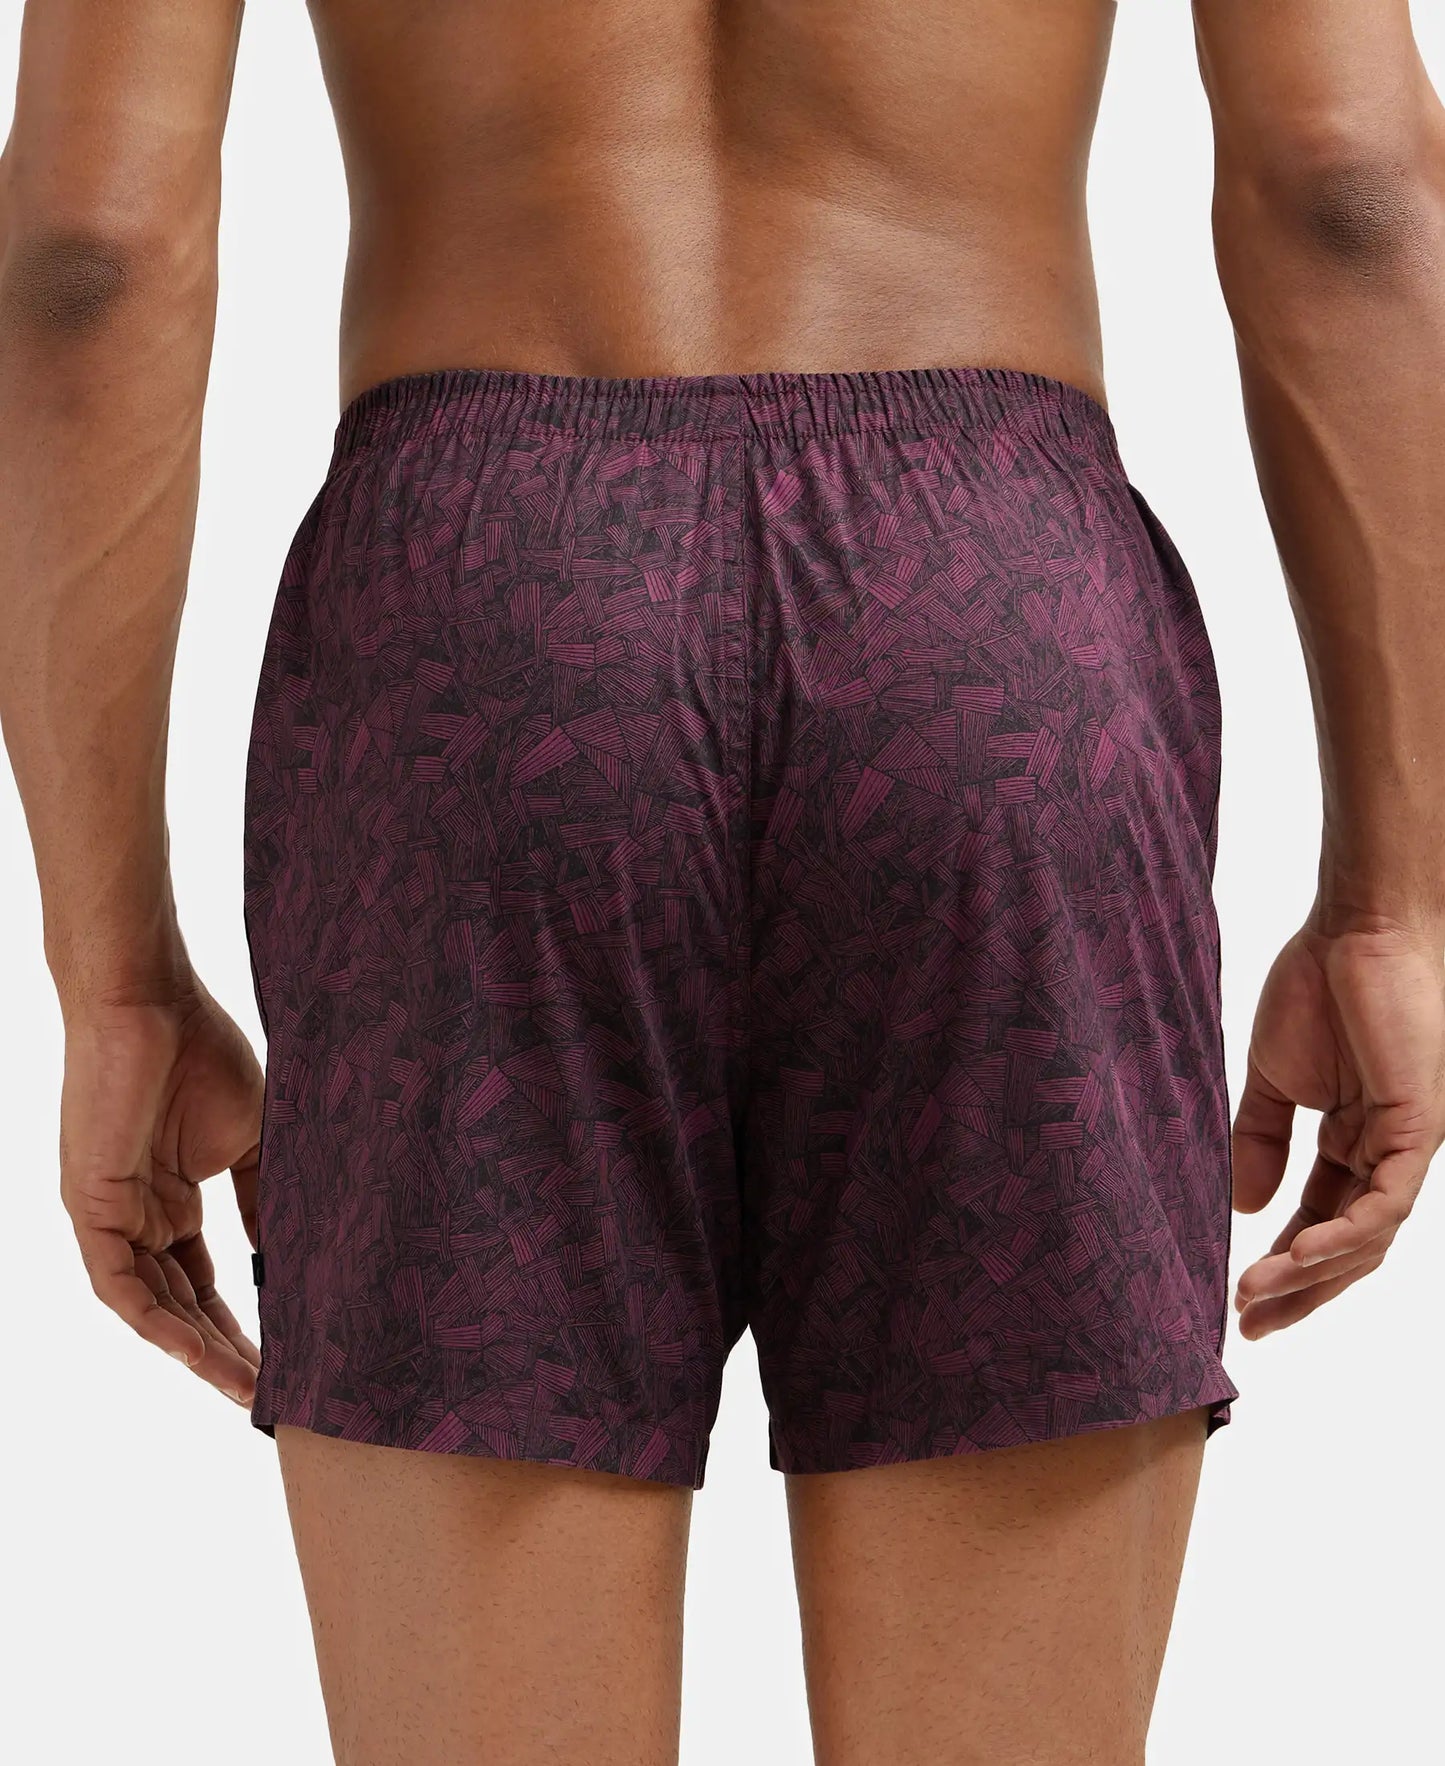 Super Combed Mercerized Cotton Woven Checkered Inner Boxers with Ultrasoft and Durable Inner Waistband - Mauve Wine & Seaport Teal-7